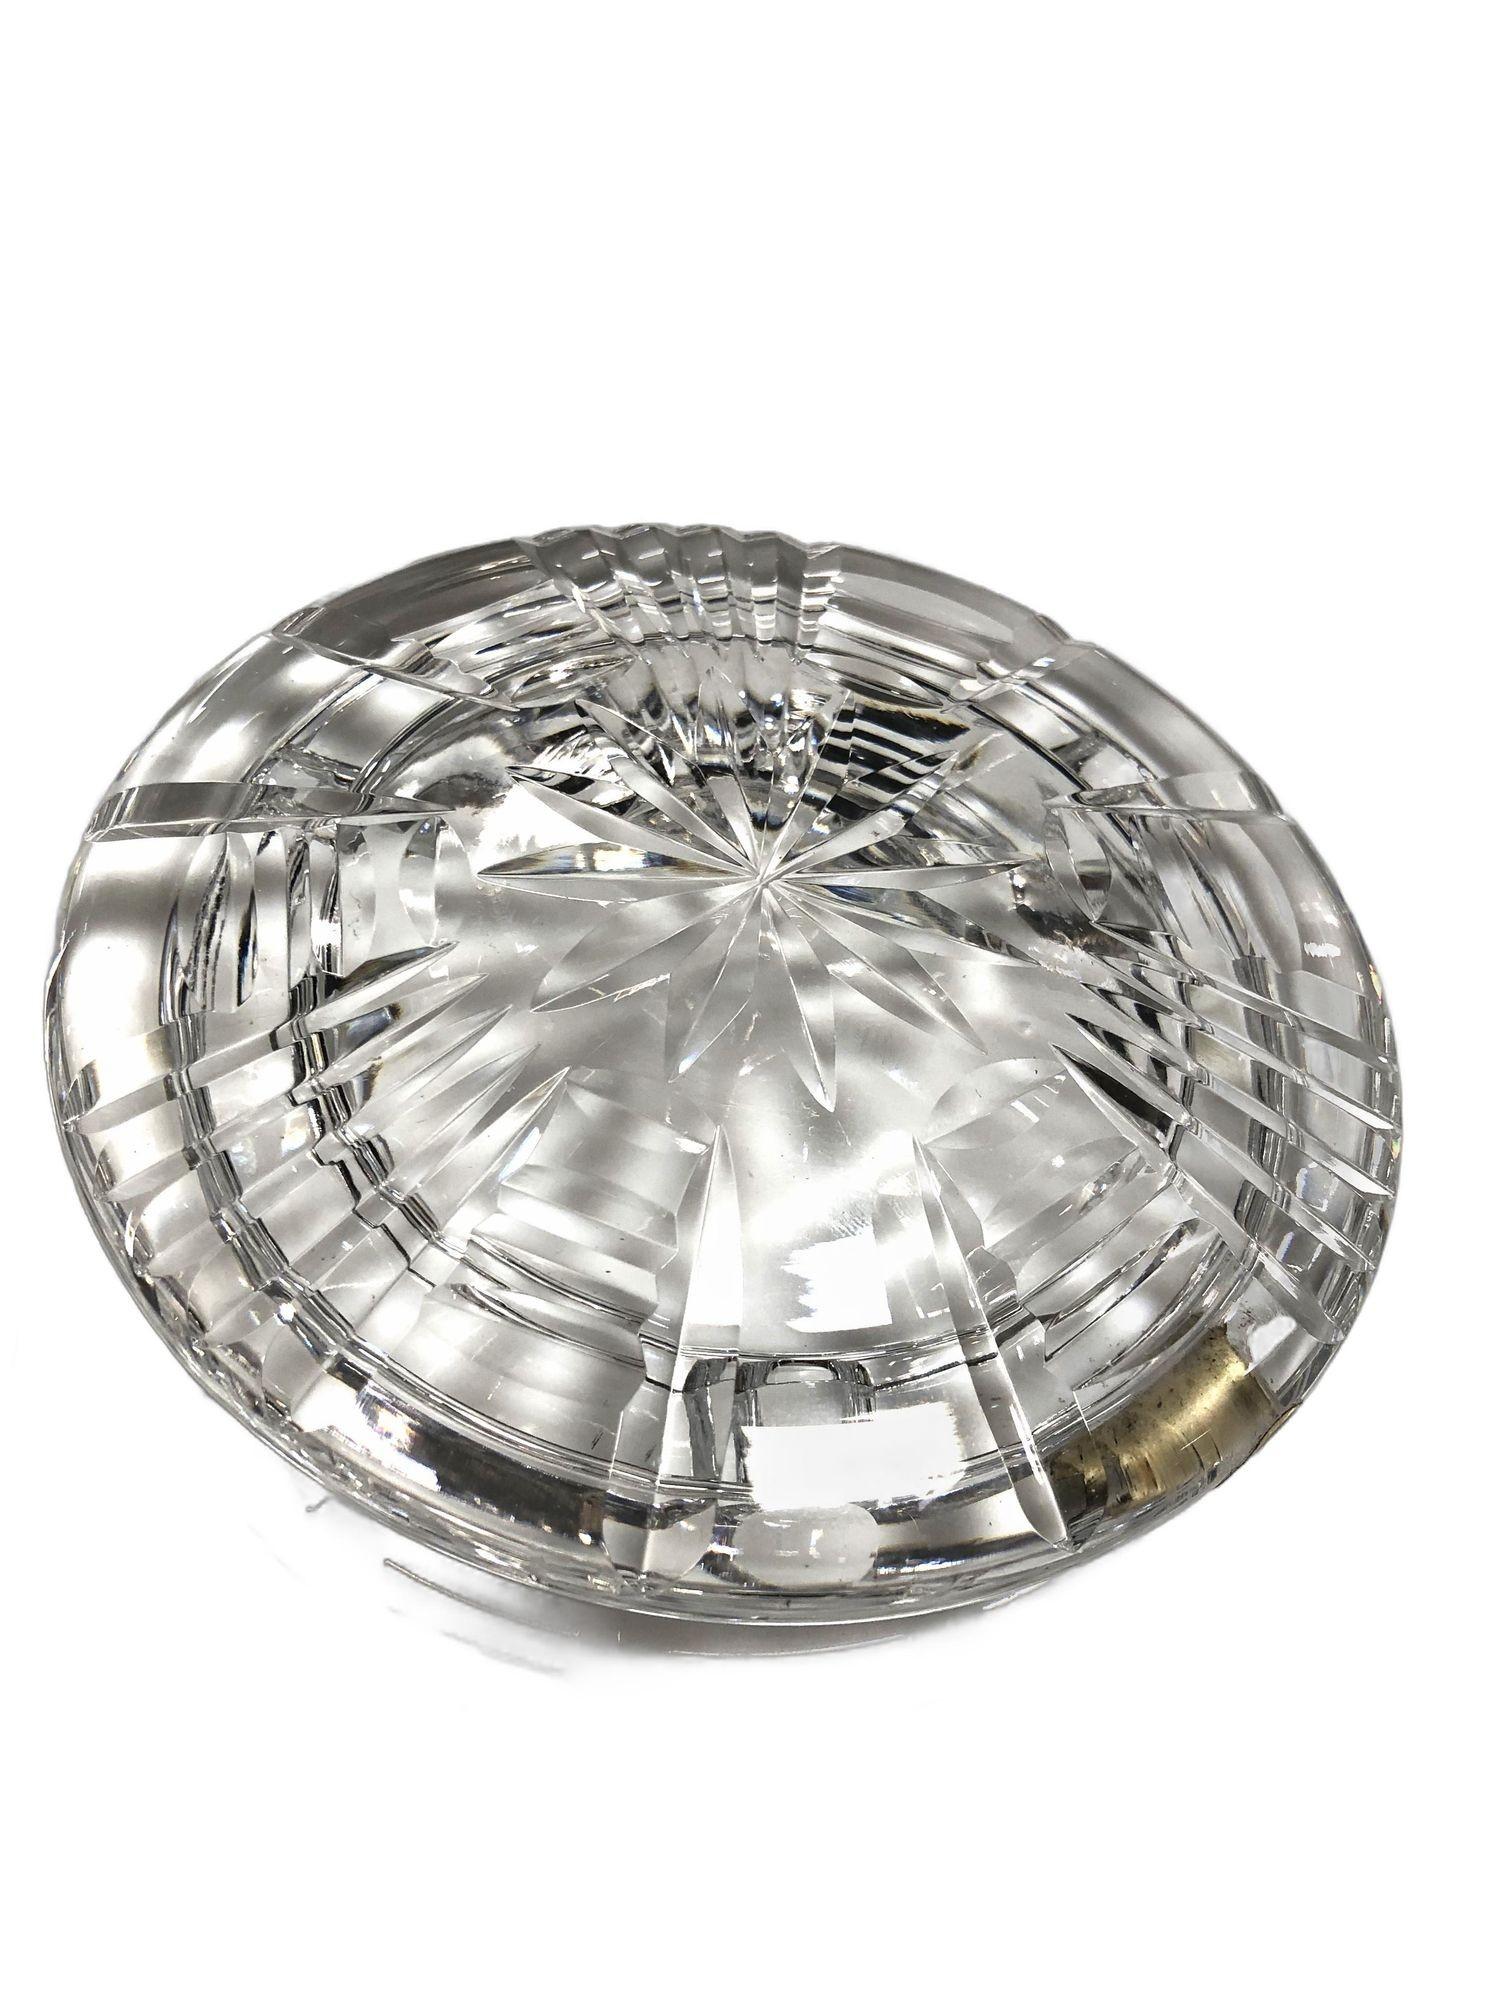 Cendrier Waterford Crystal 5